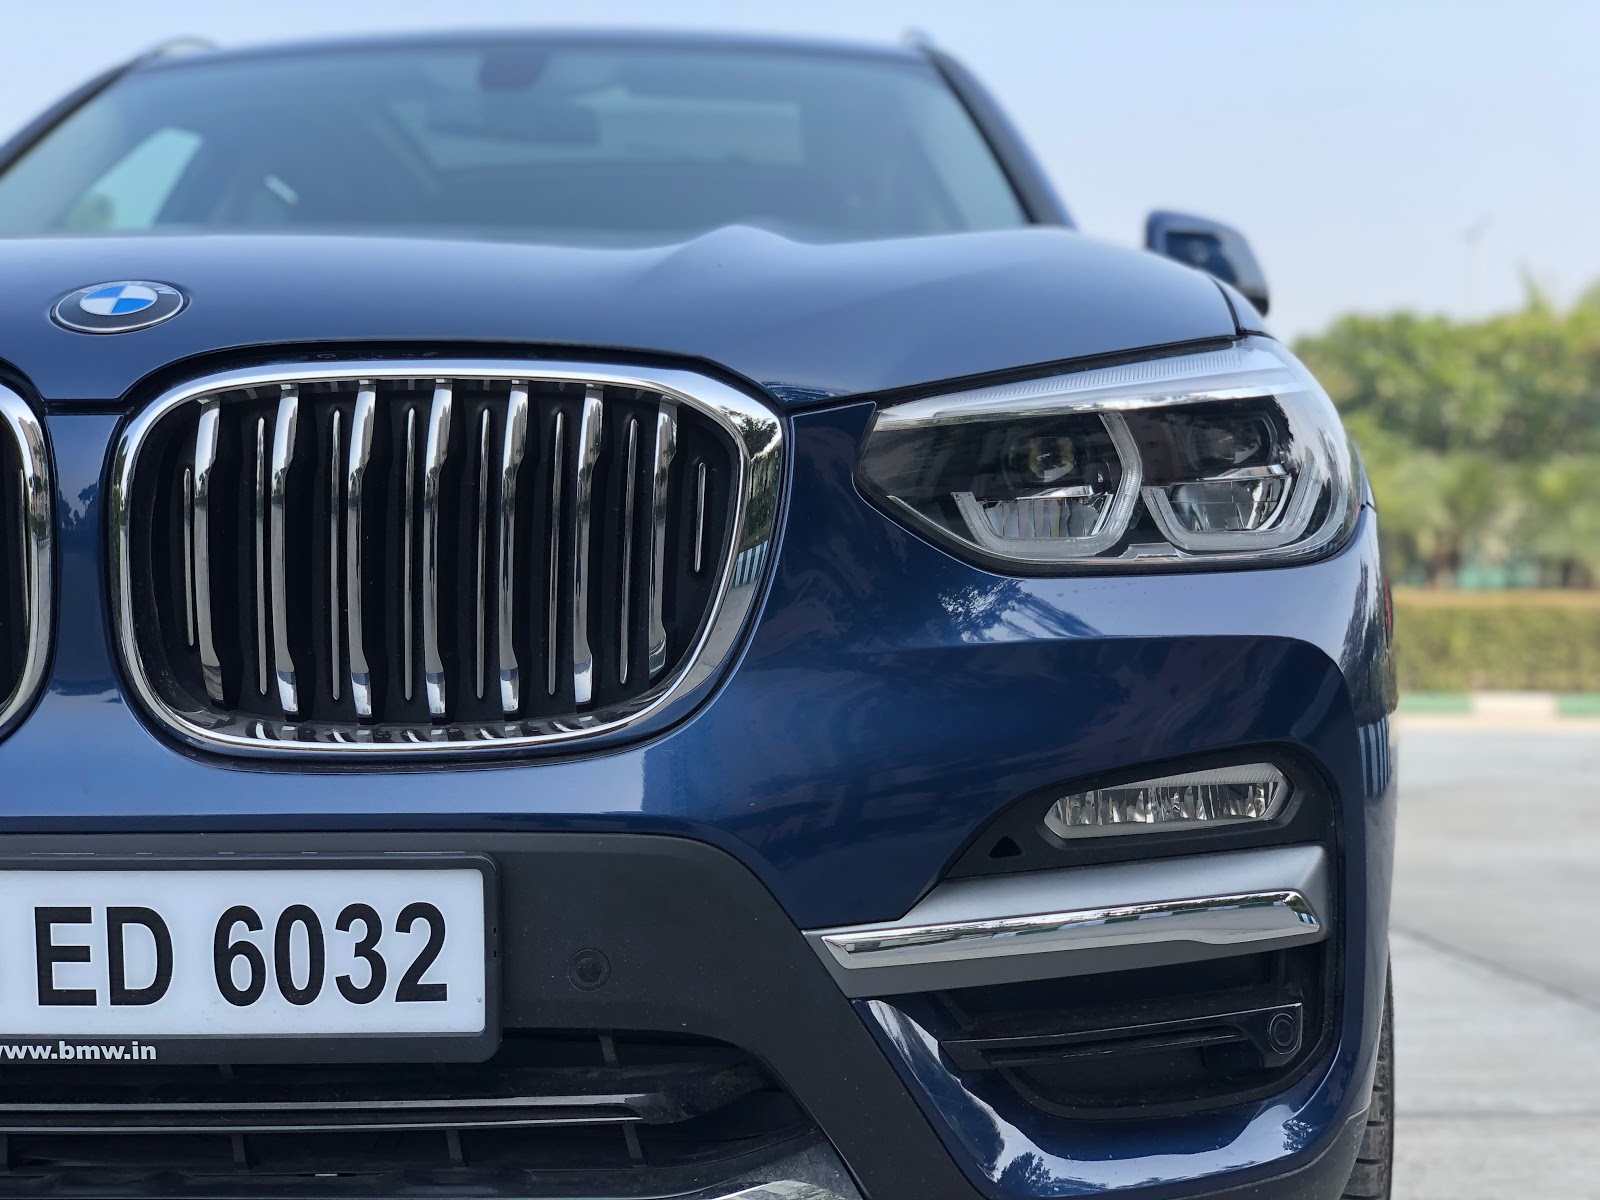 The BMW X3 xDrive20d front